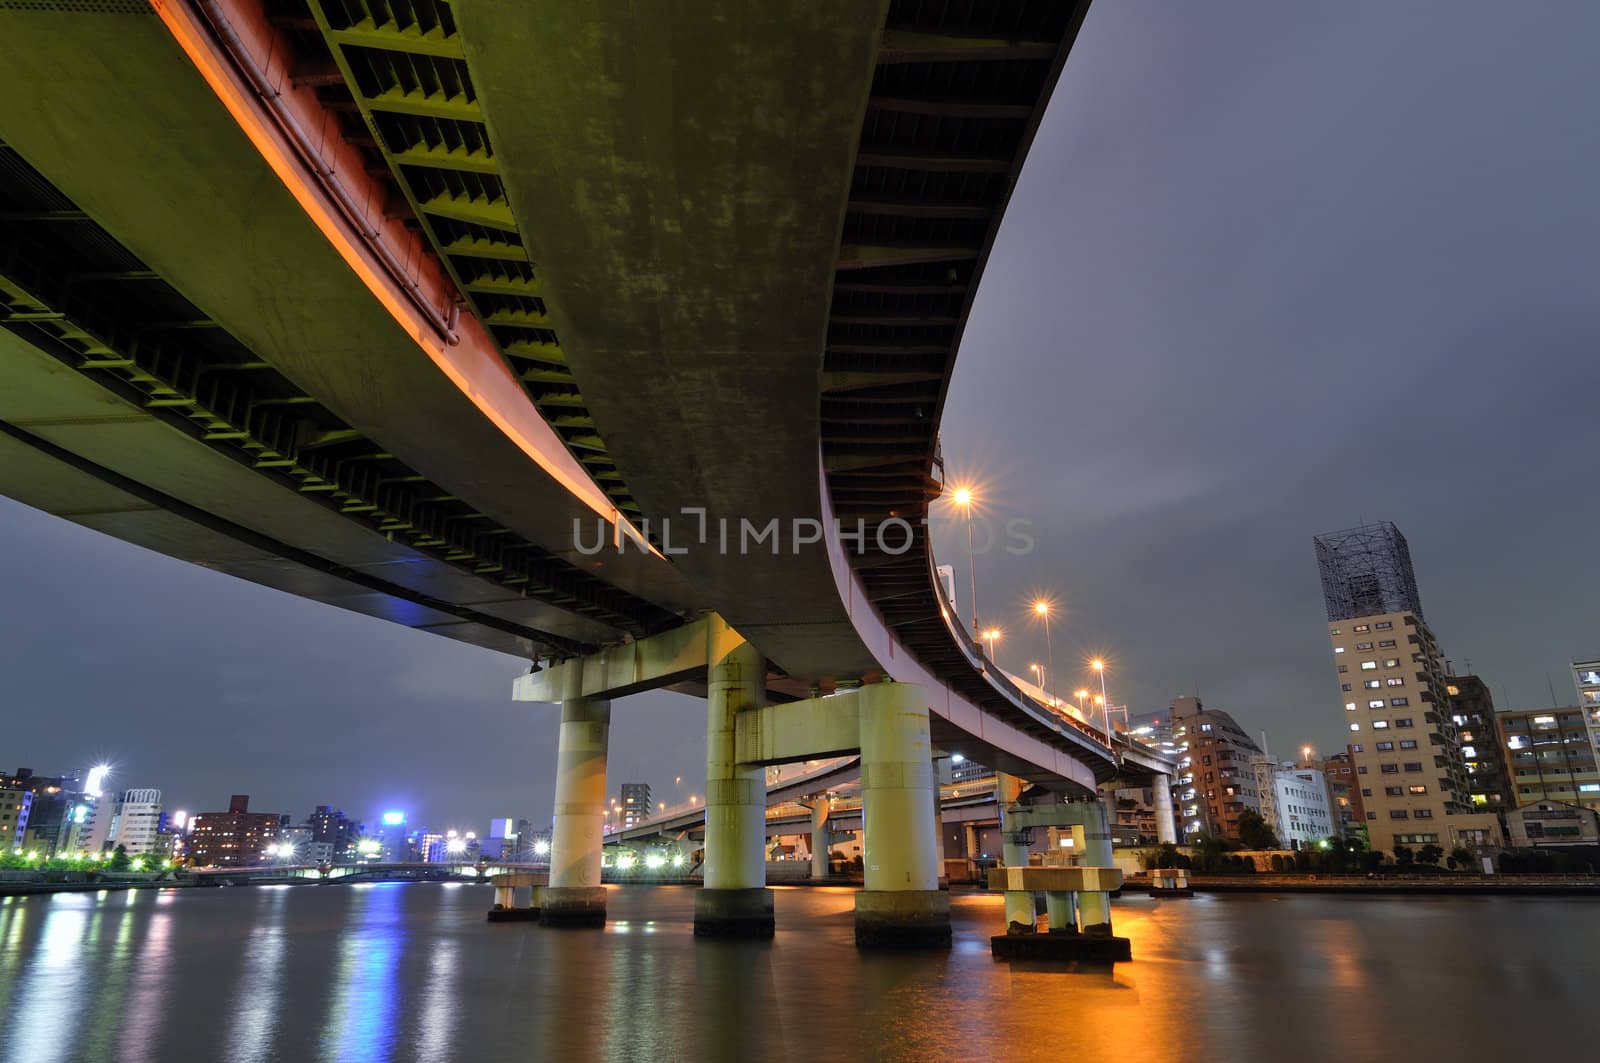 hanged up huge highway structure over river waters by night